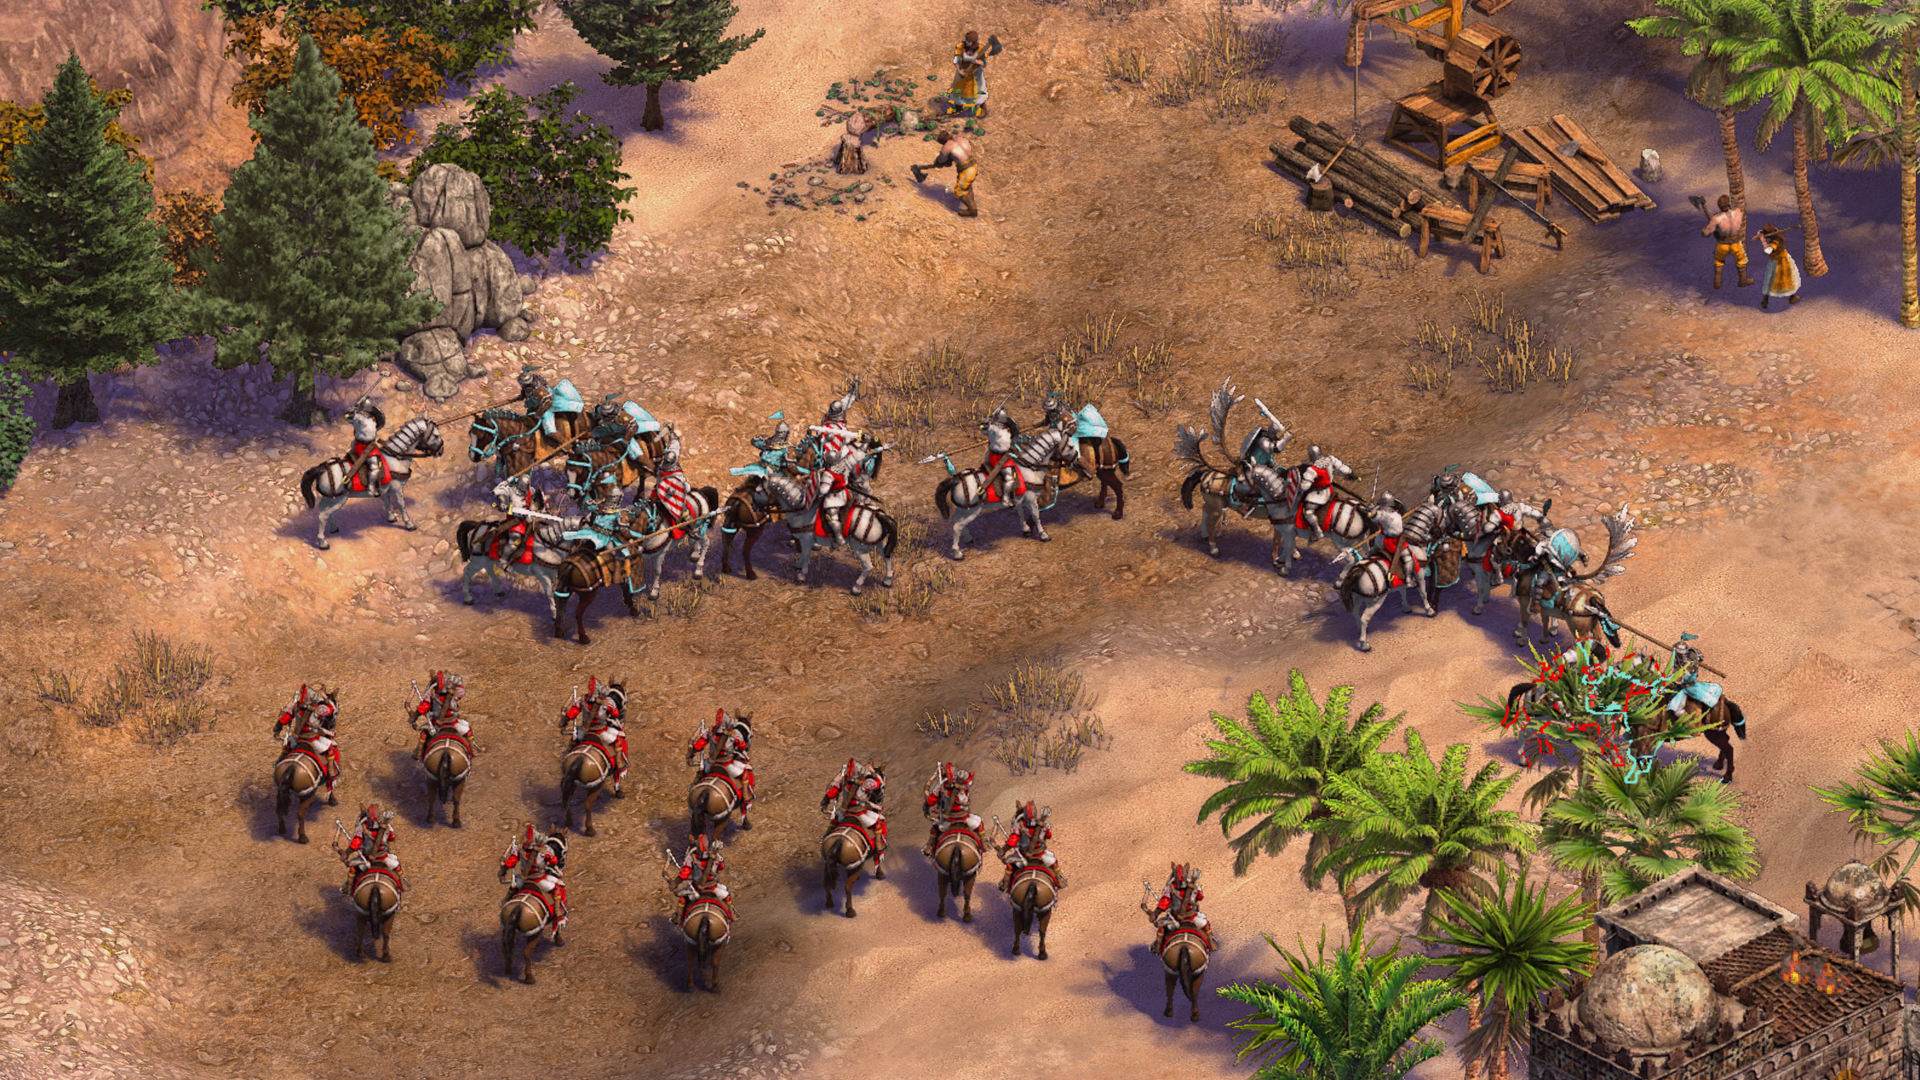 📜 Age of Empires III - Day 1 Hotfix - Game Release Notes - Age of